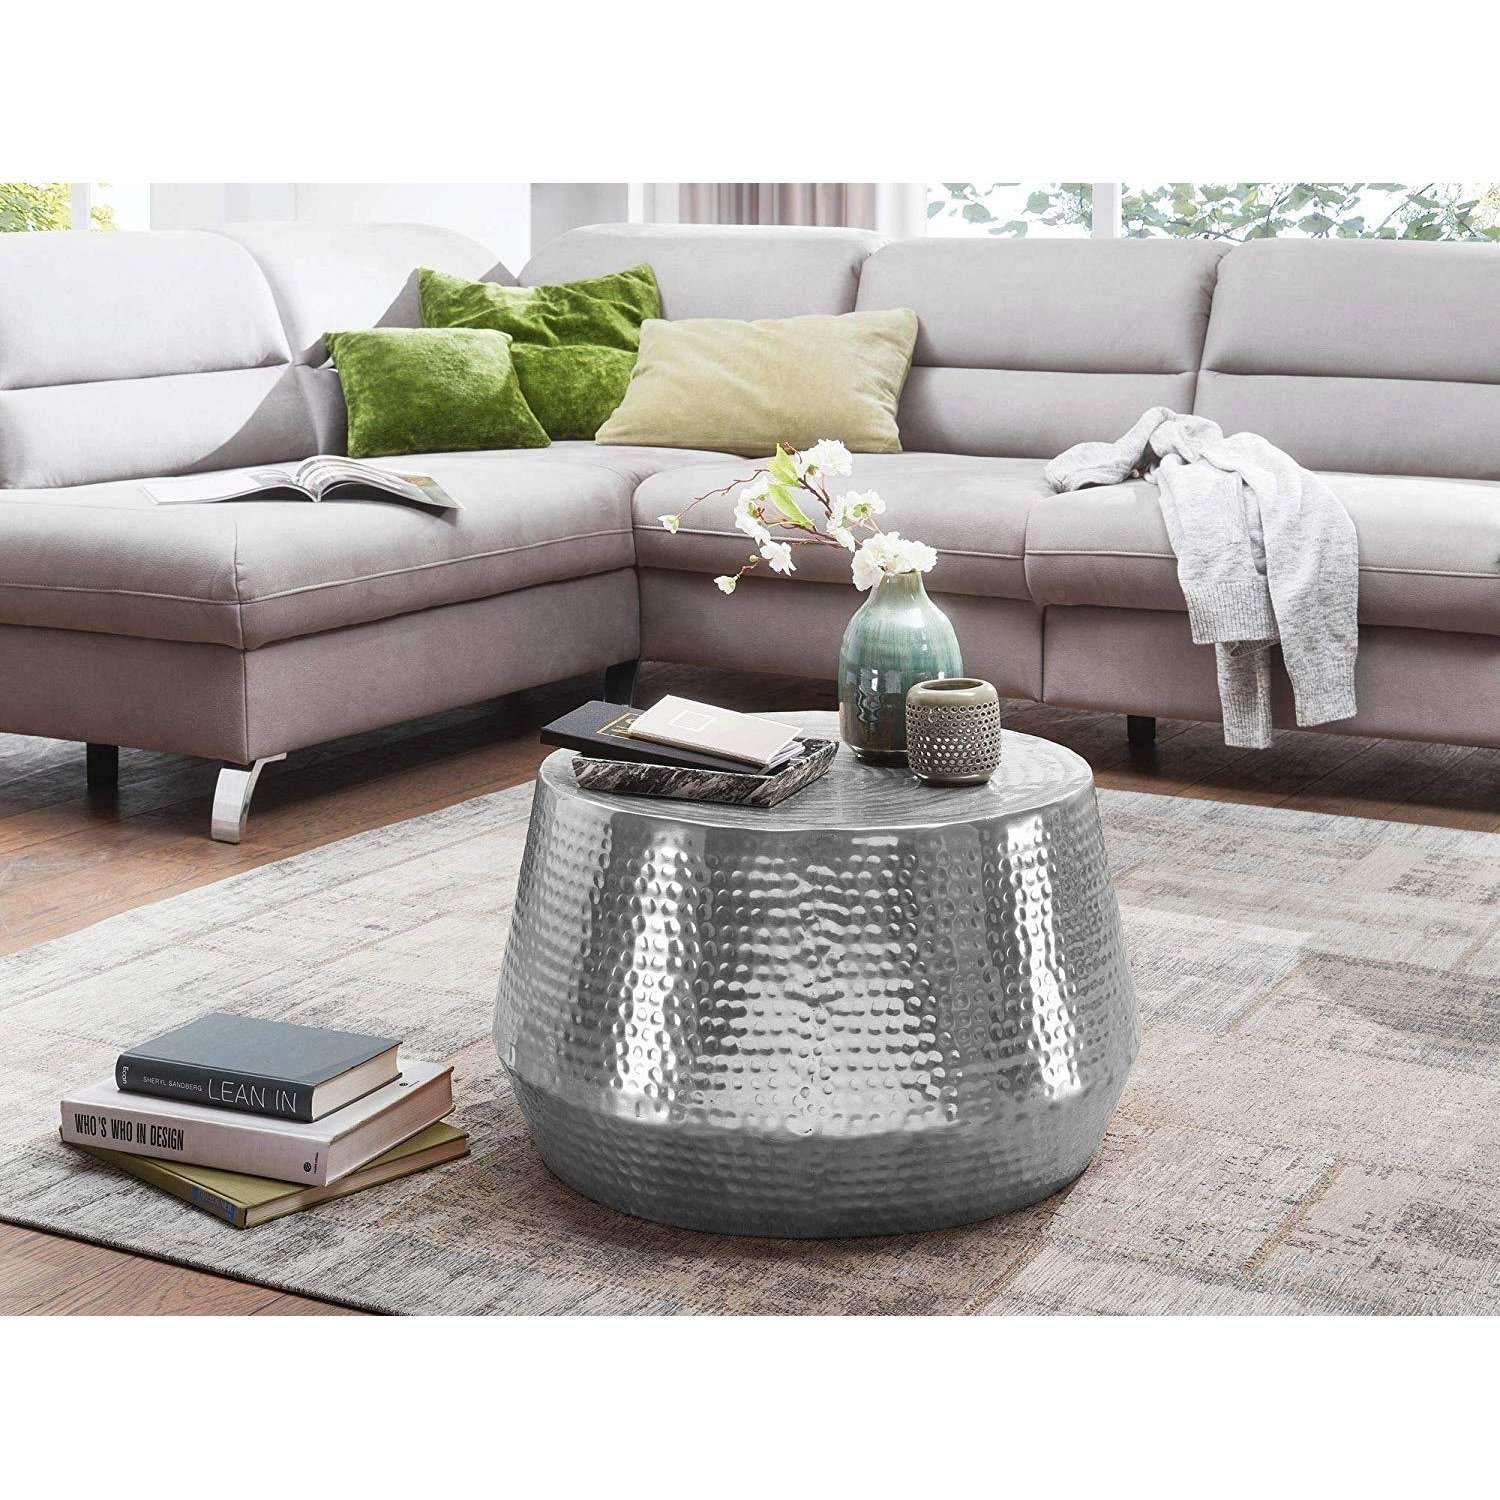 Nancy's Aluminum Coffee Tables - Living room table - Silver - 60 x 36 x 60 cm